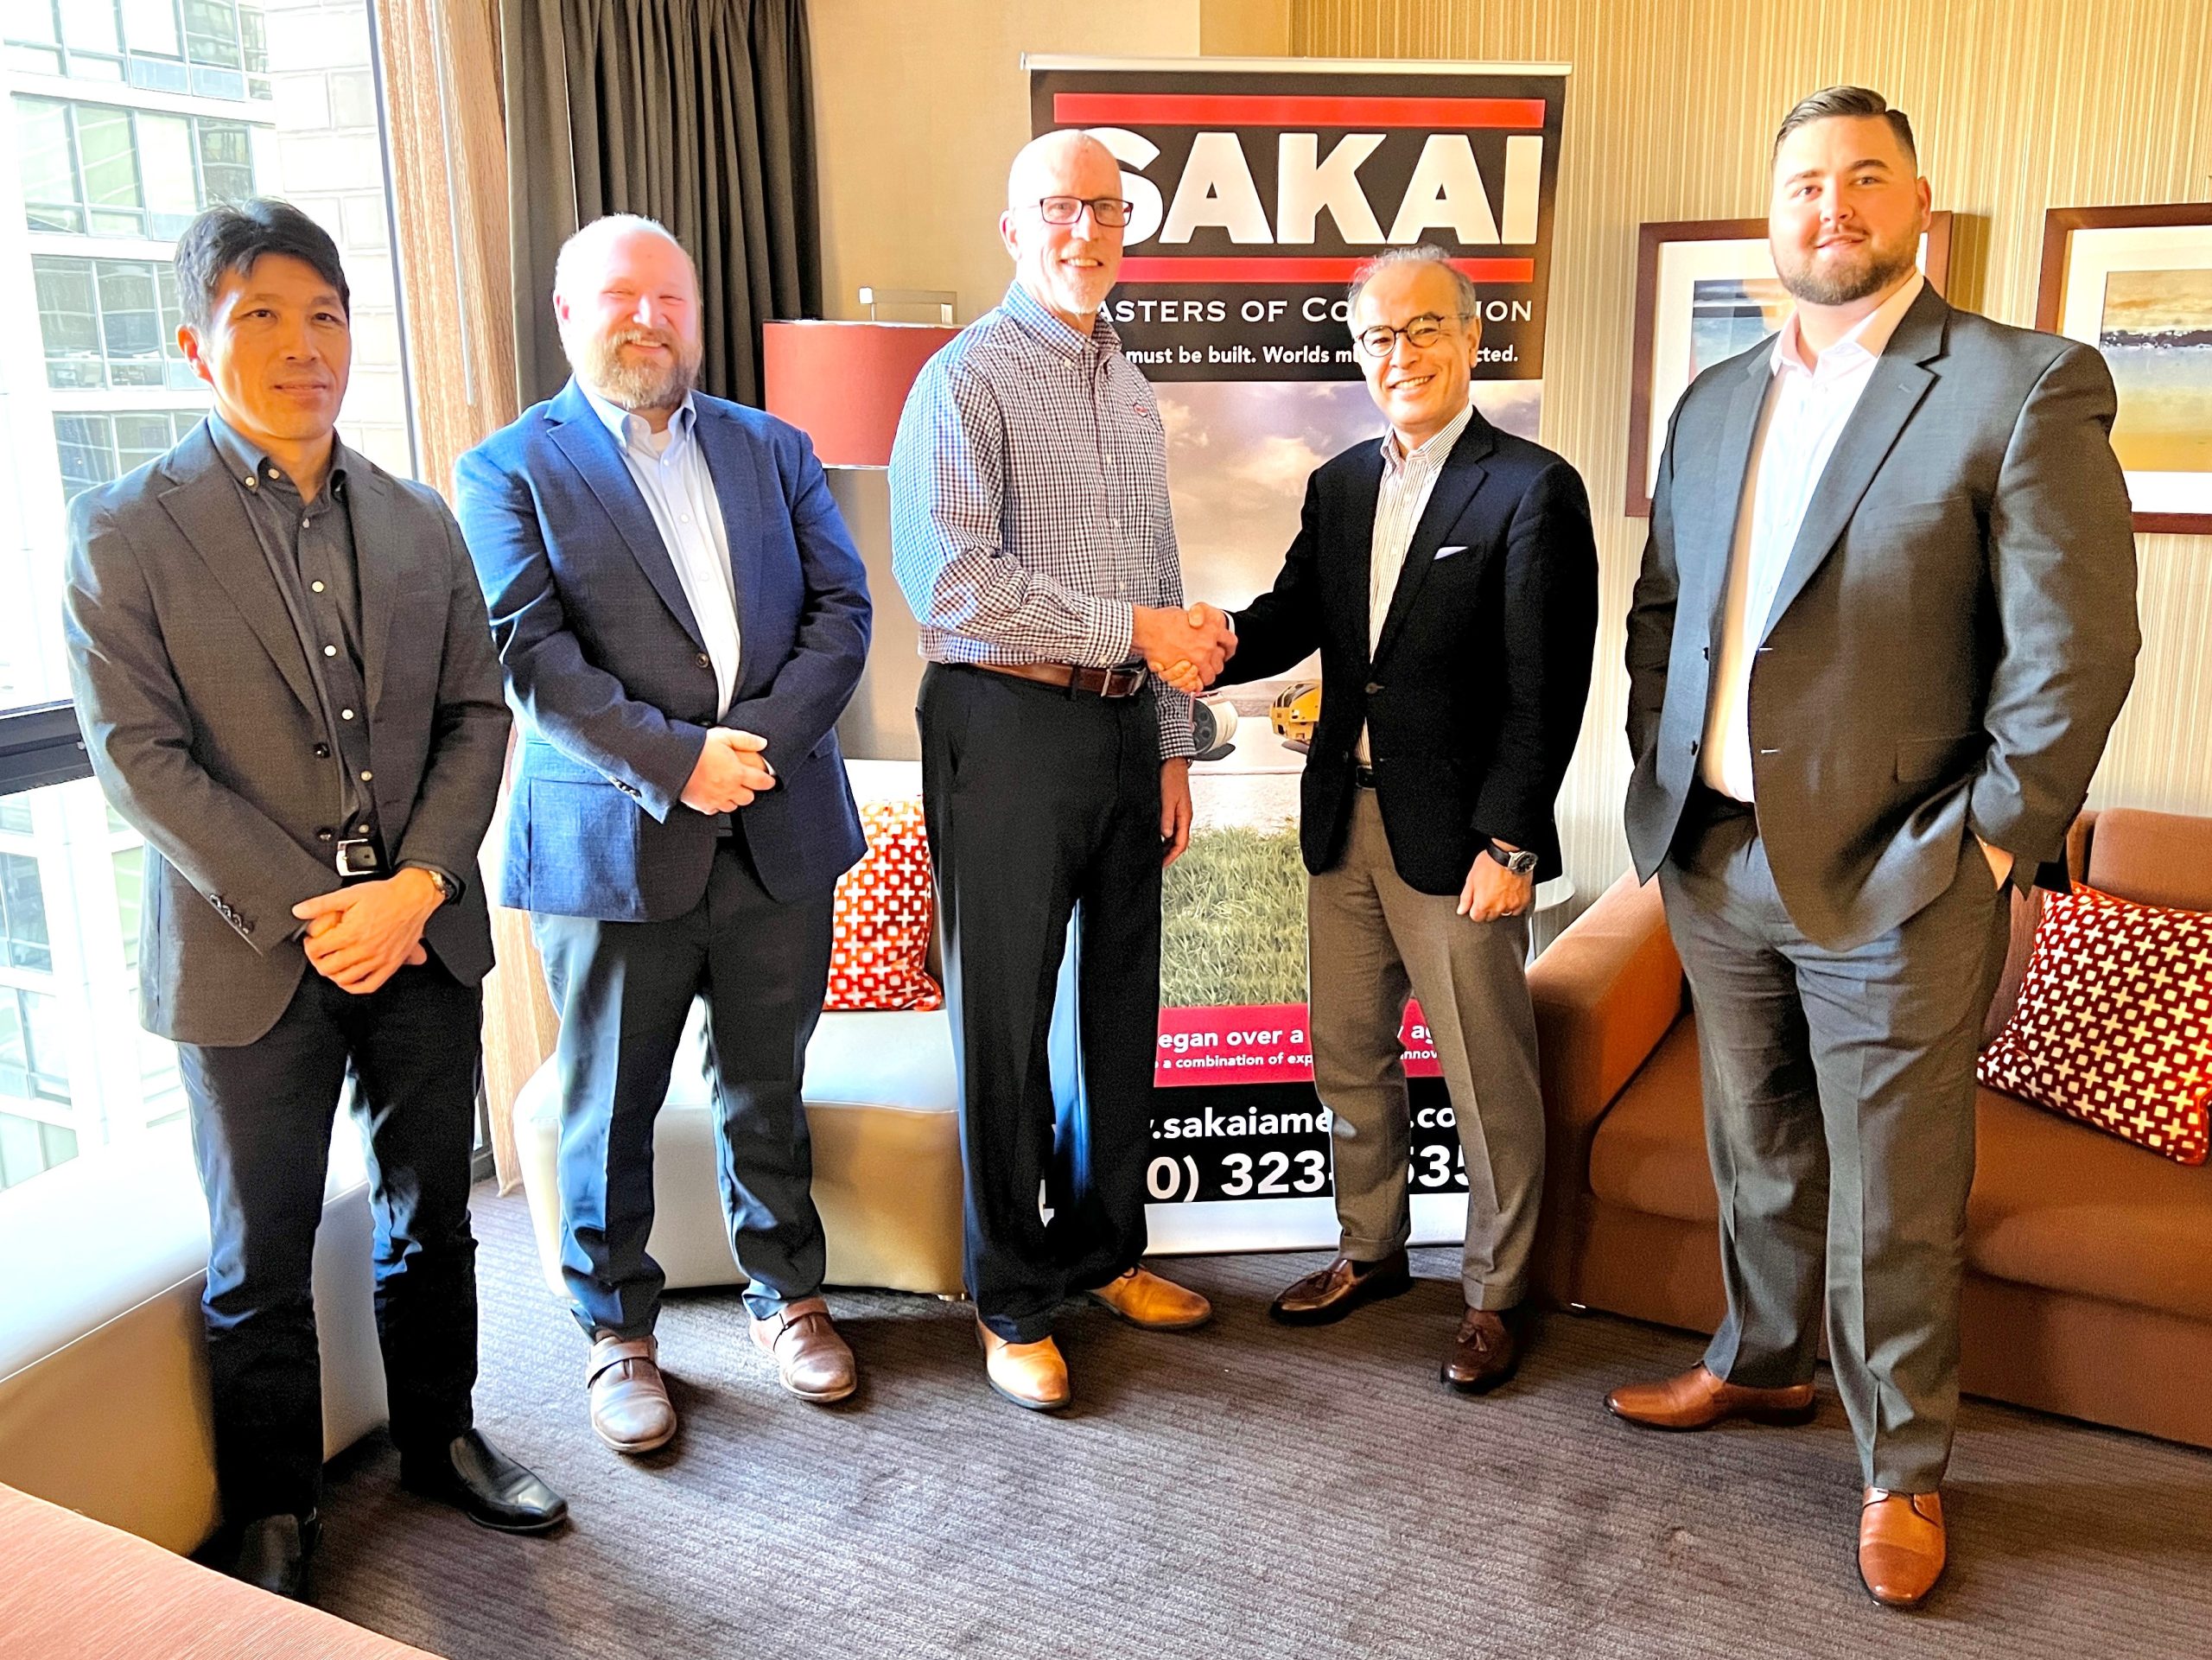 Sakai leadership with Taylor Construction Equipment leadership shaking hands to become a new asphalt roller and soil compactor dealer.